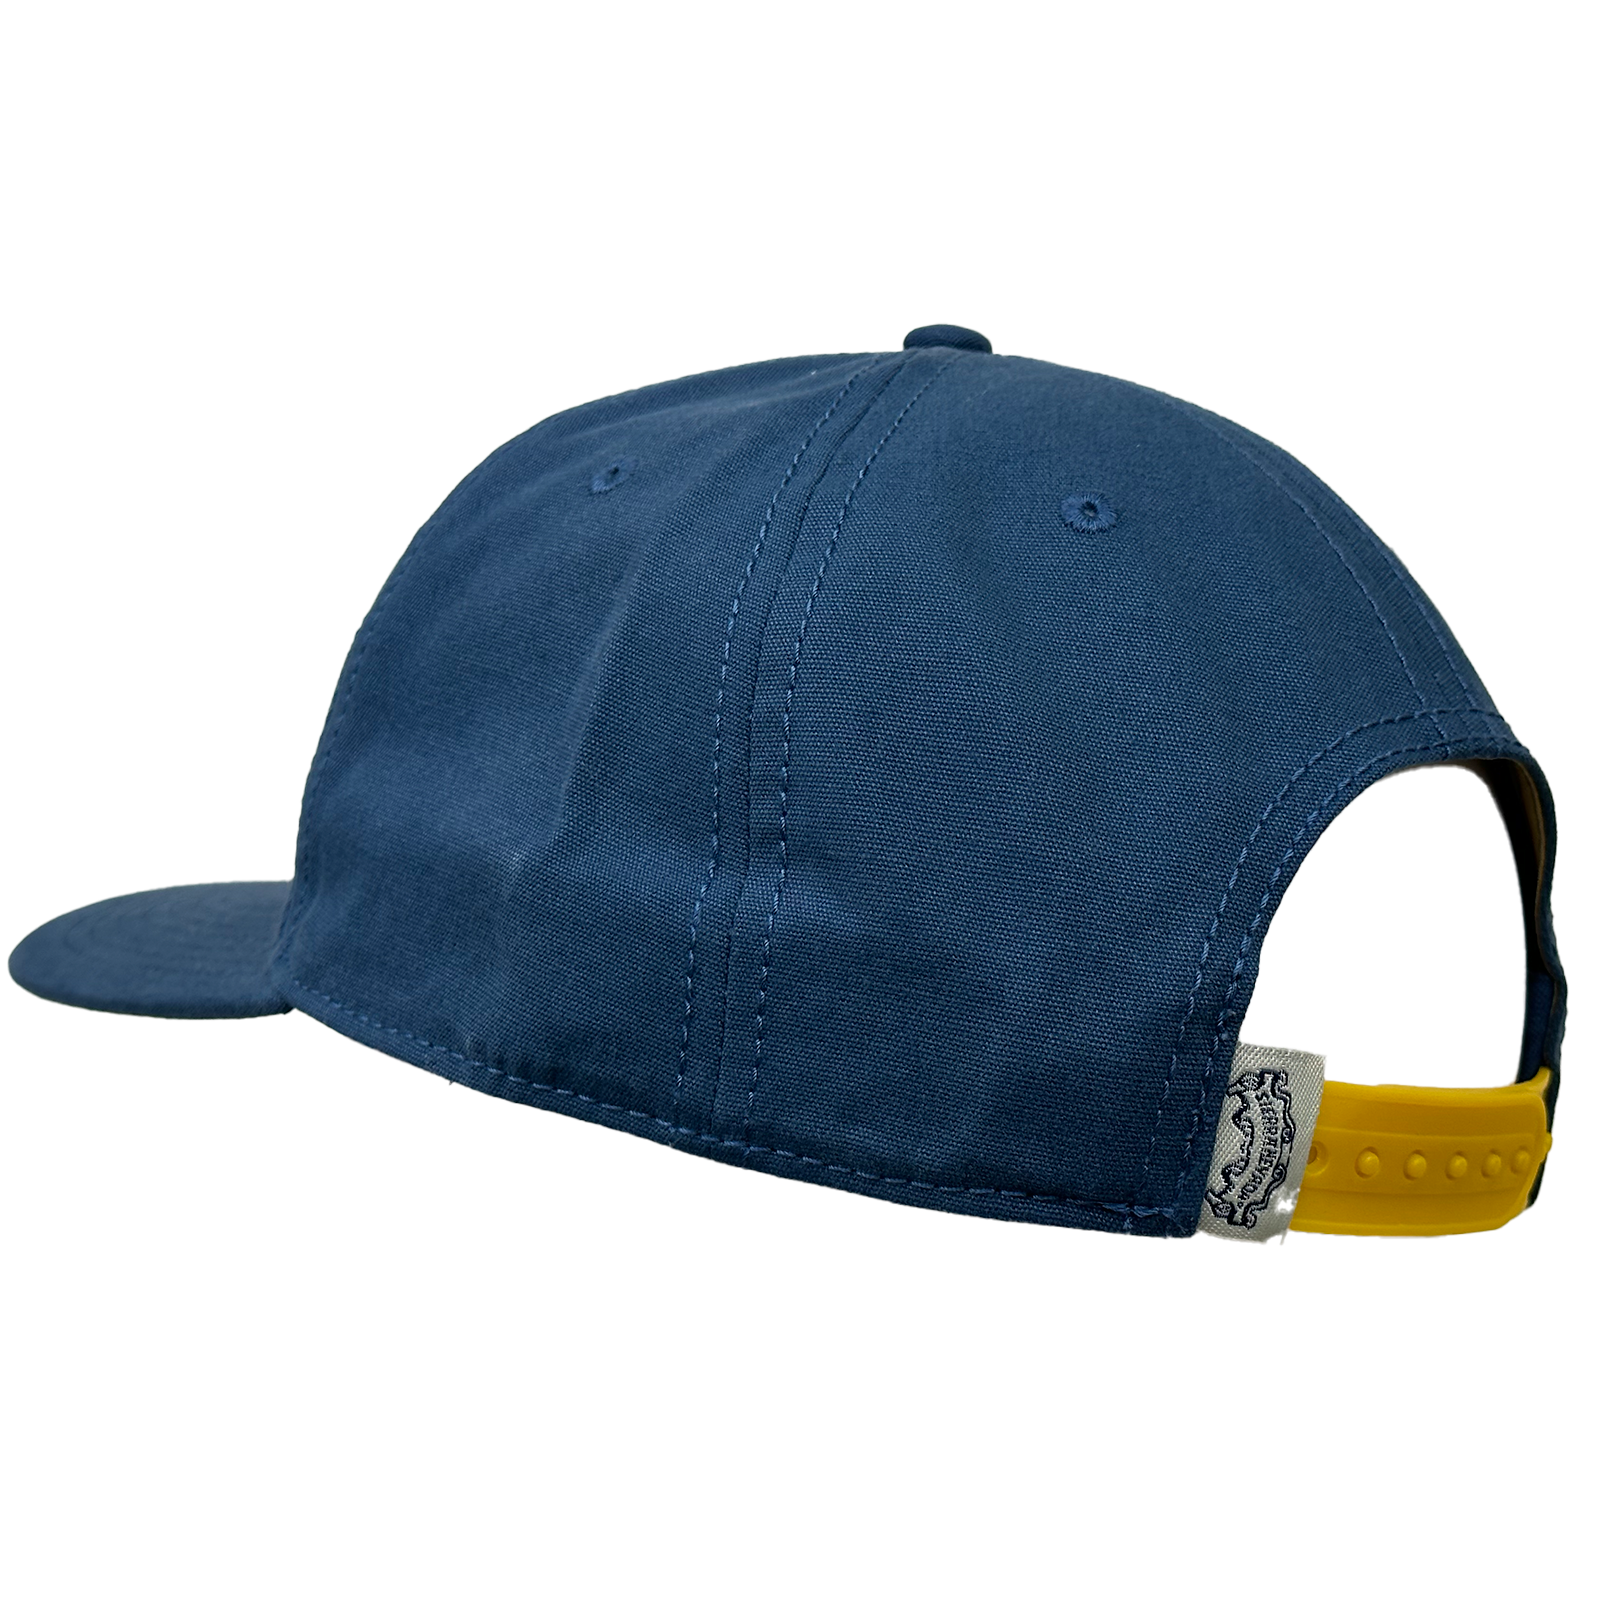 Sierra Nevada Brewing Co. Classic Golfer Hat - back view featuring the snapback closure